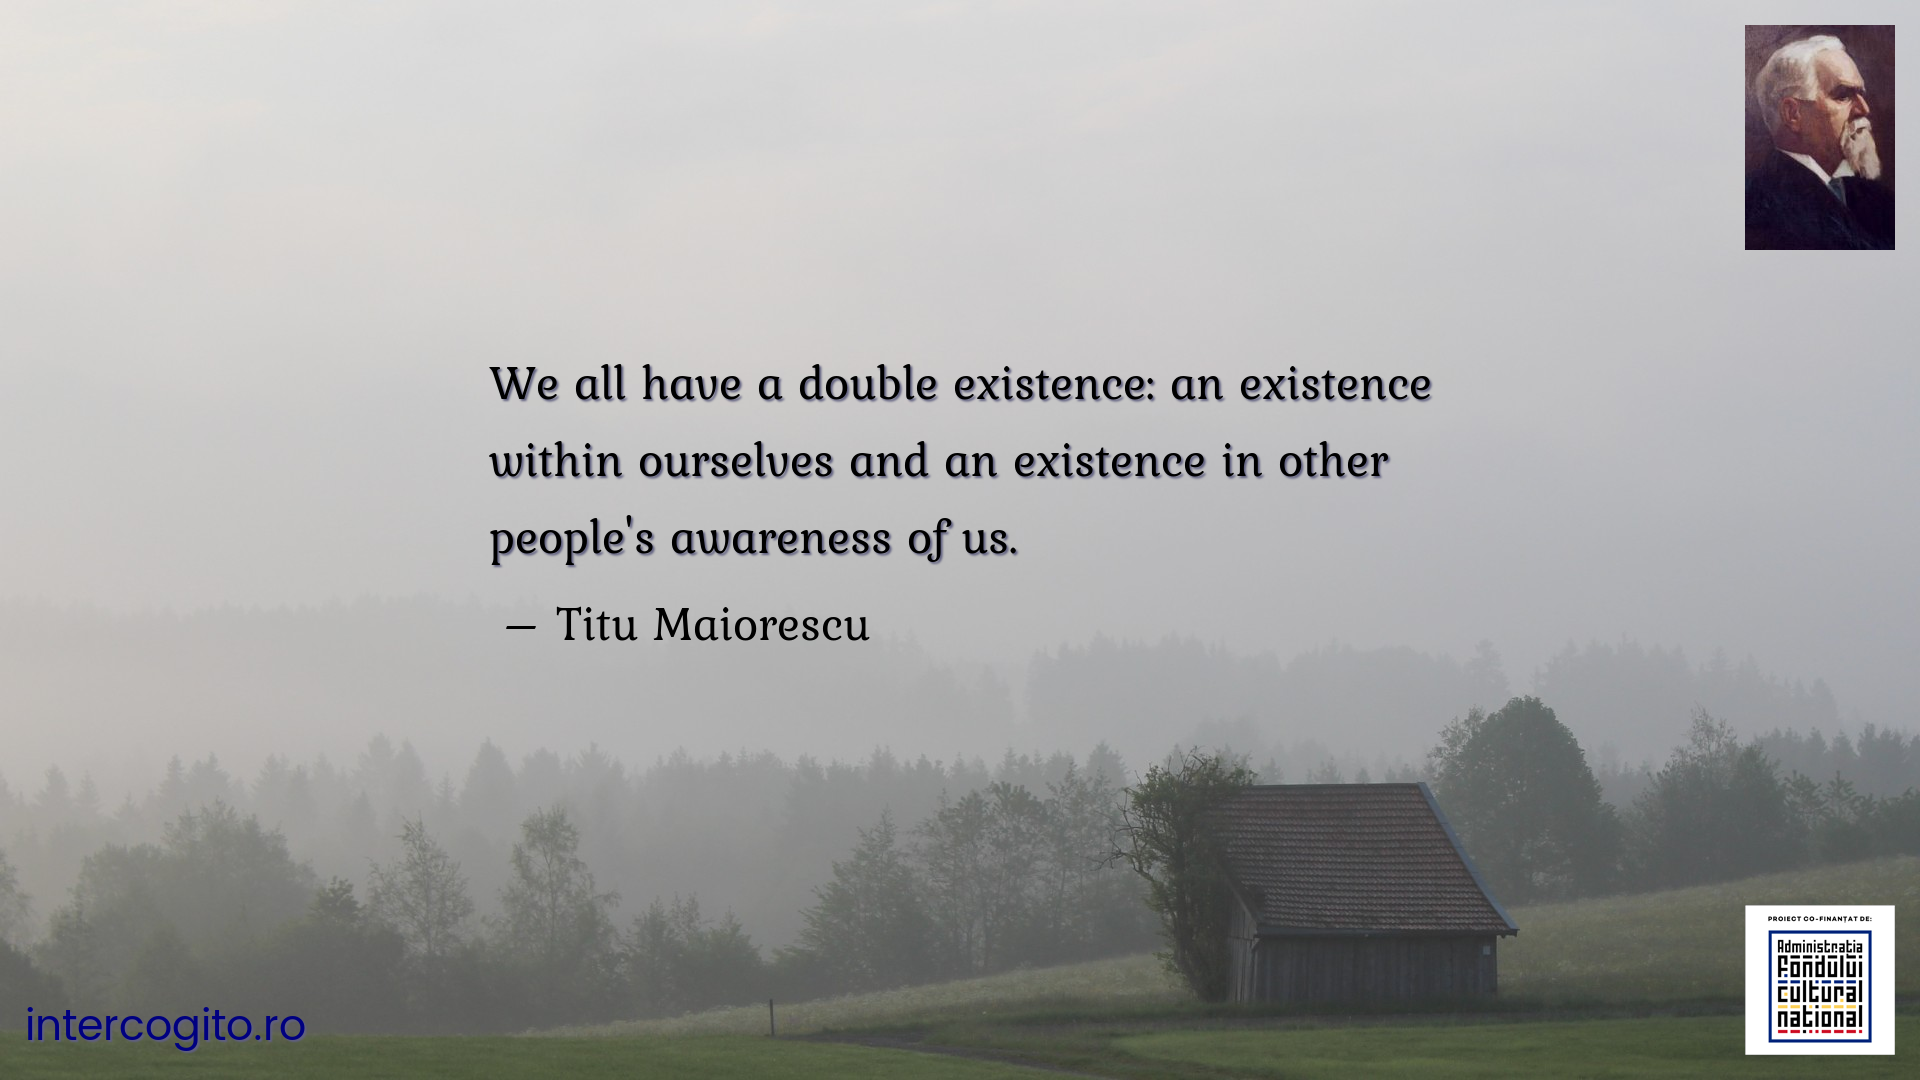 We all have a double existence: an existence within ourselves and an existence in other people's awareness of us.